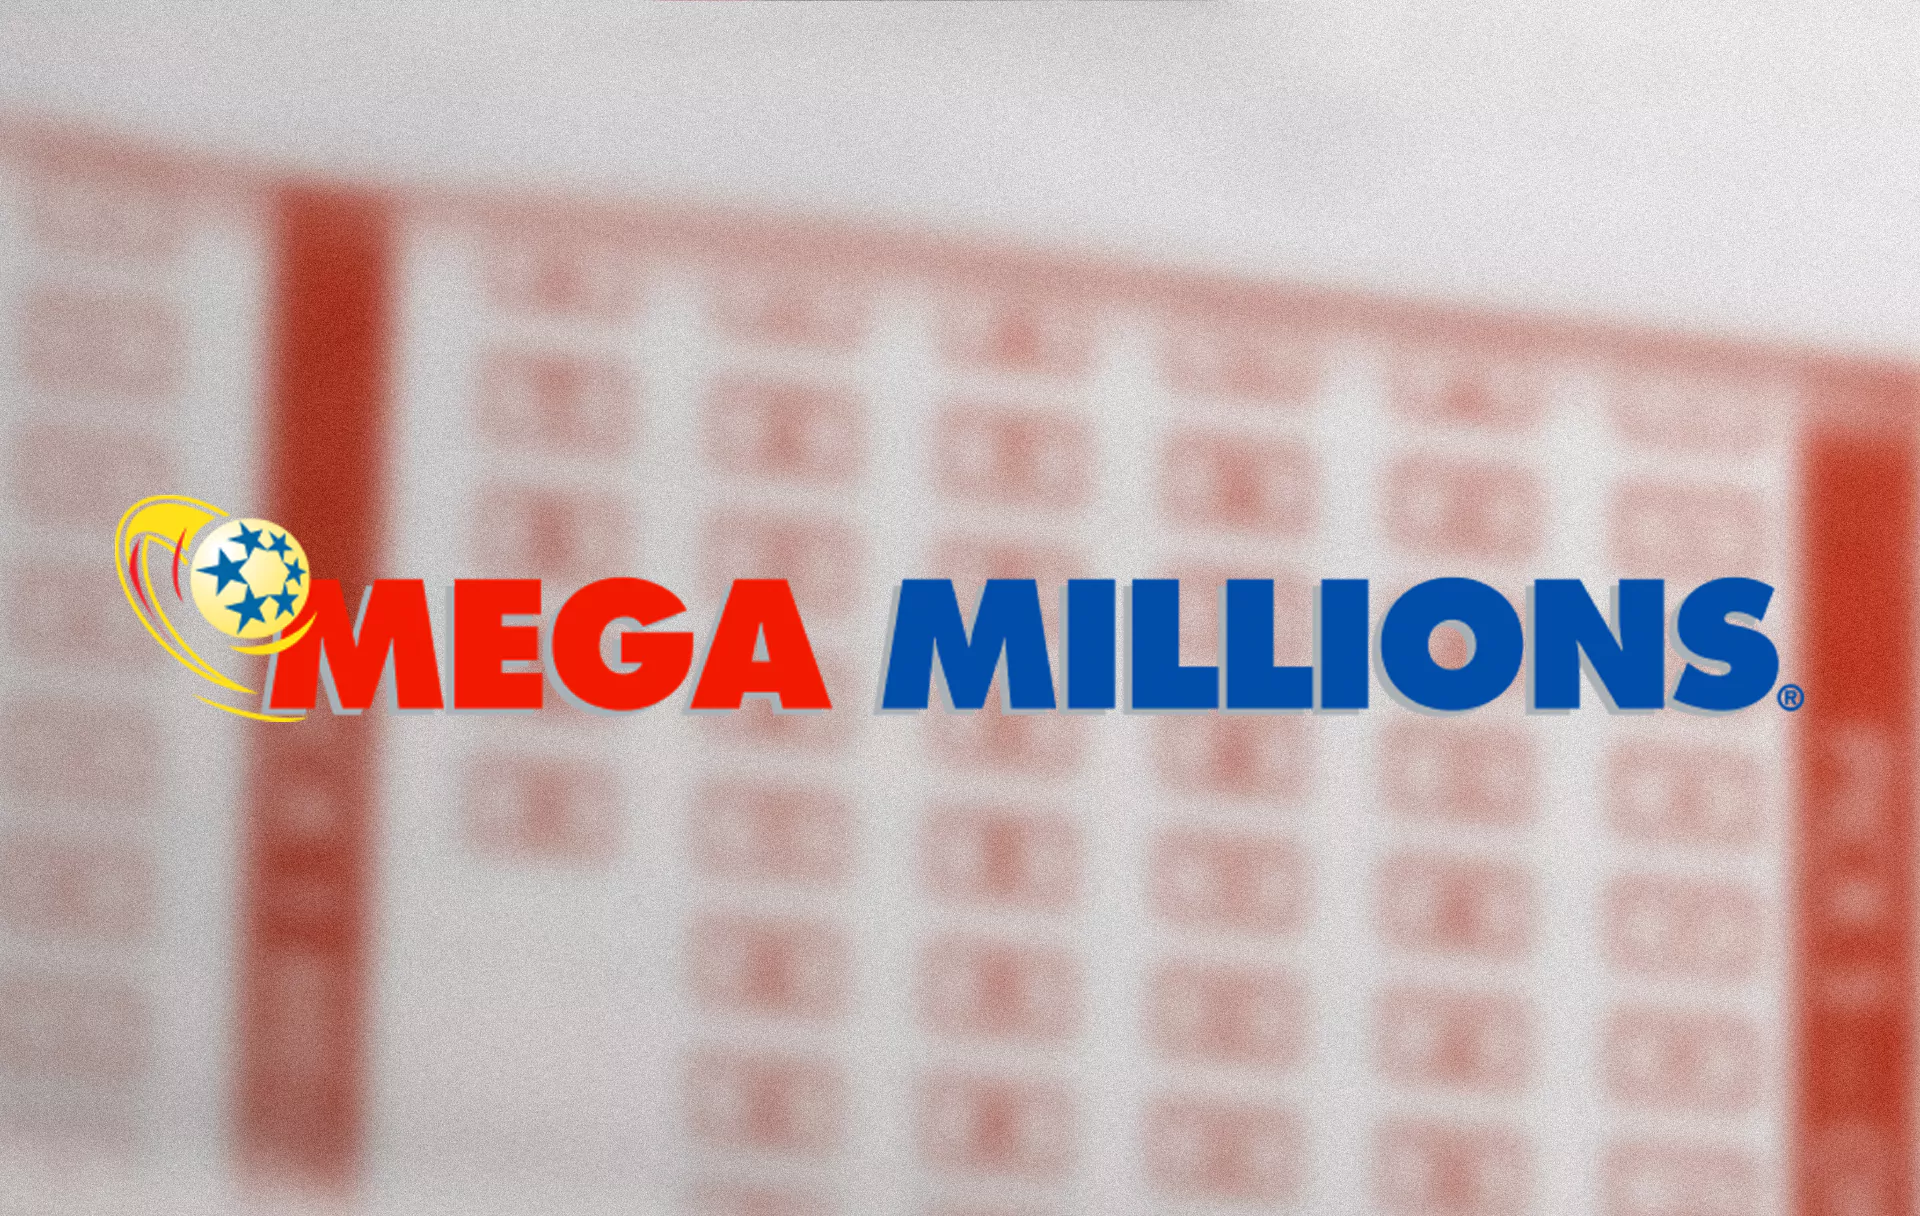 Megamillions is one of the most unpredictable online lotteries in India.